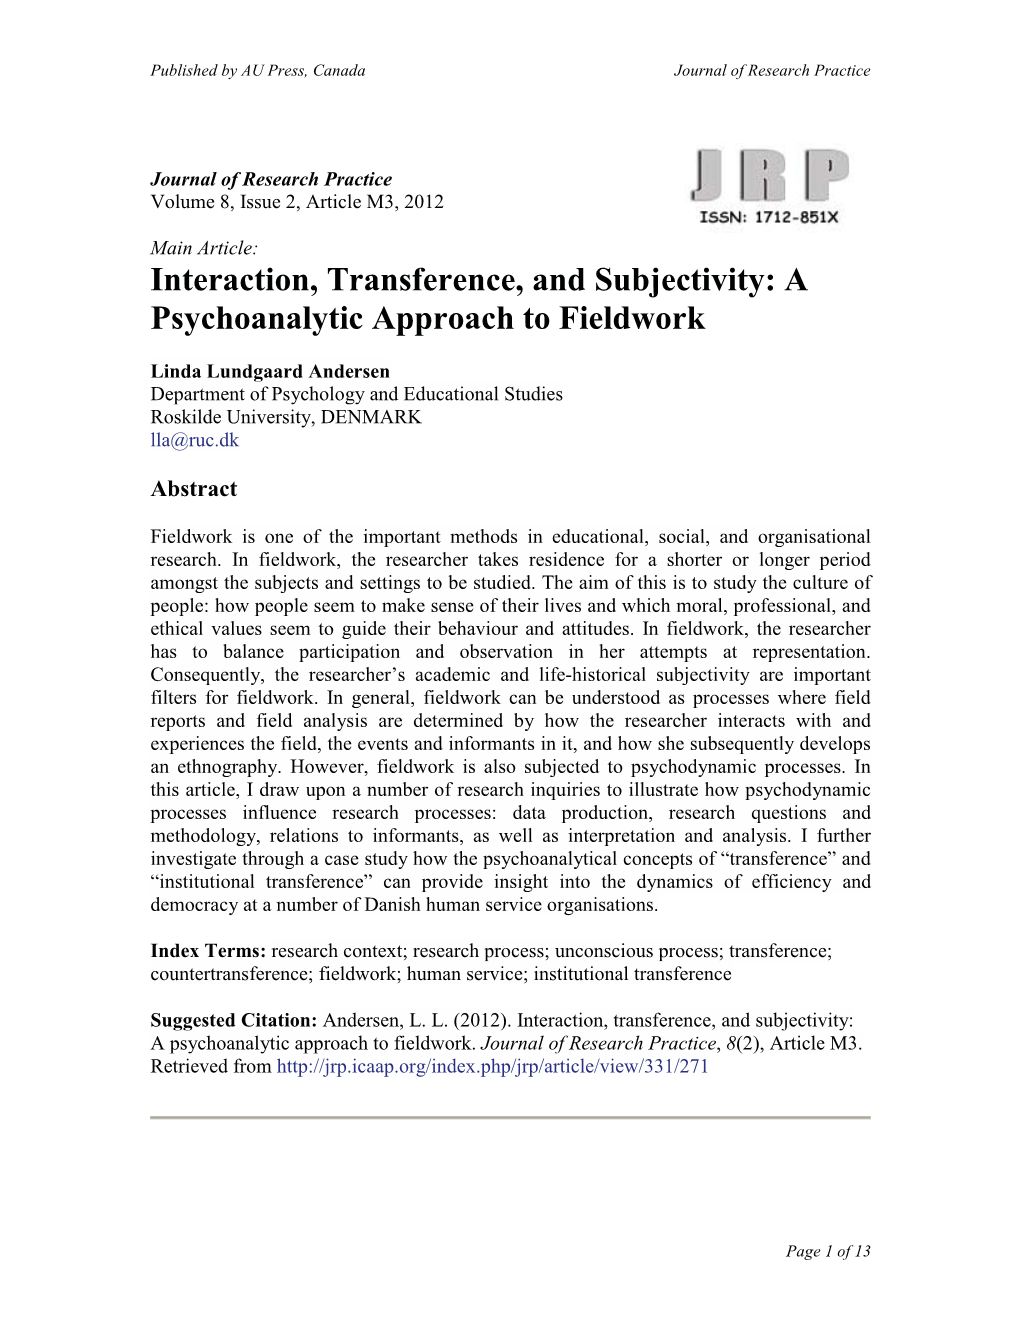 Interaction, Transference, and Subjectivity: a Psychoanalytic Approach to Fieldwork